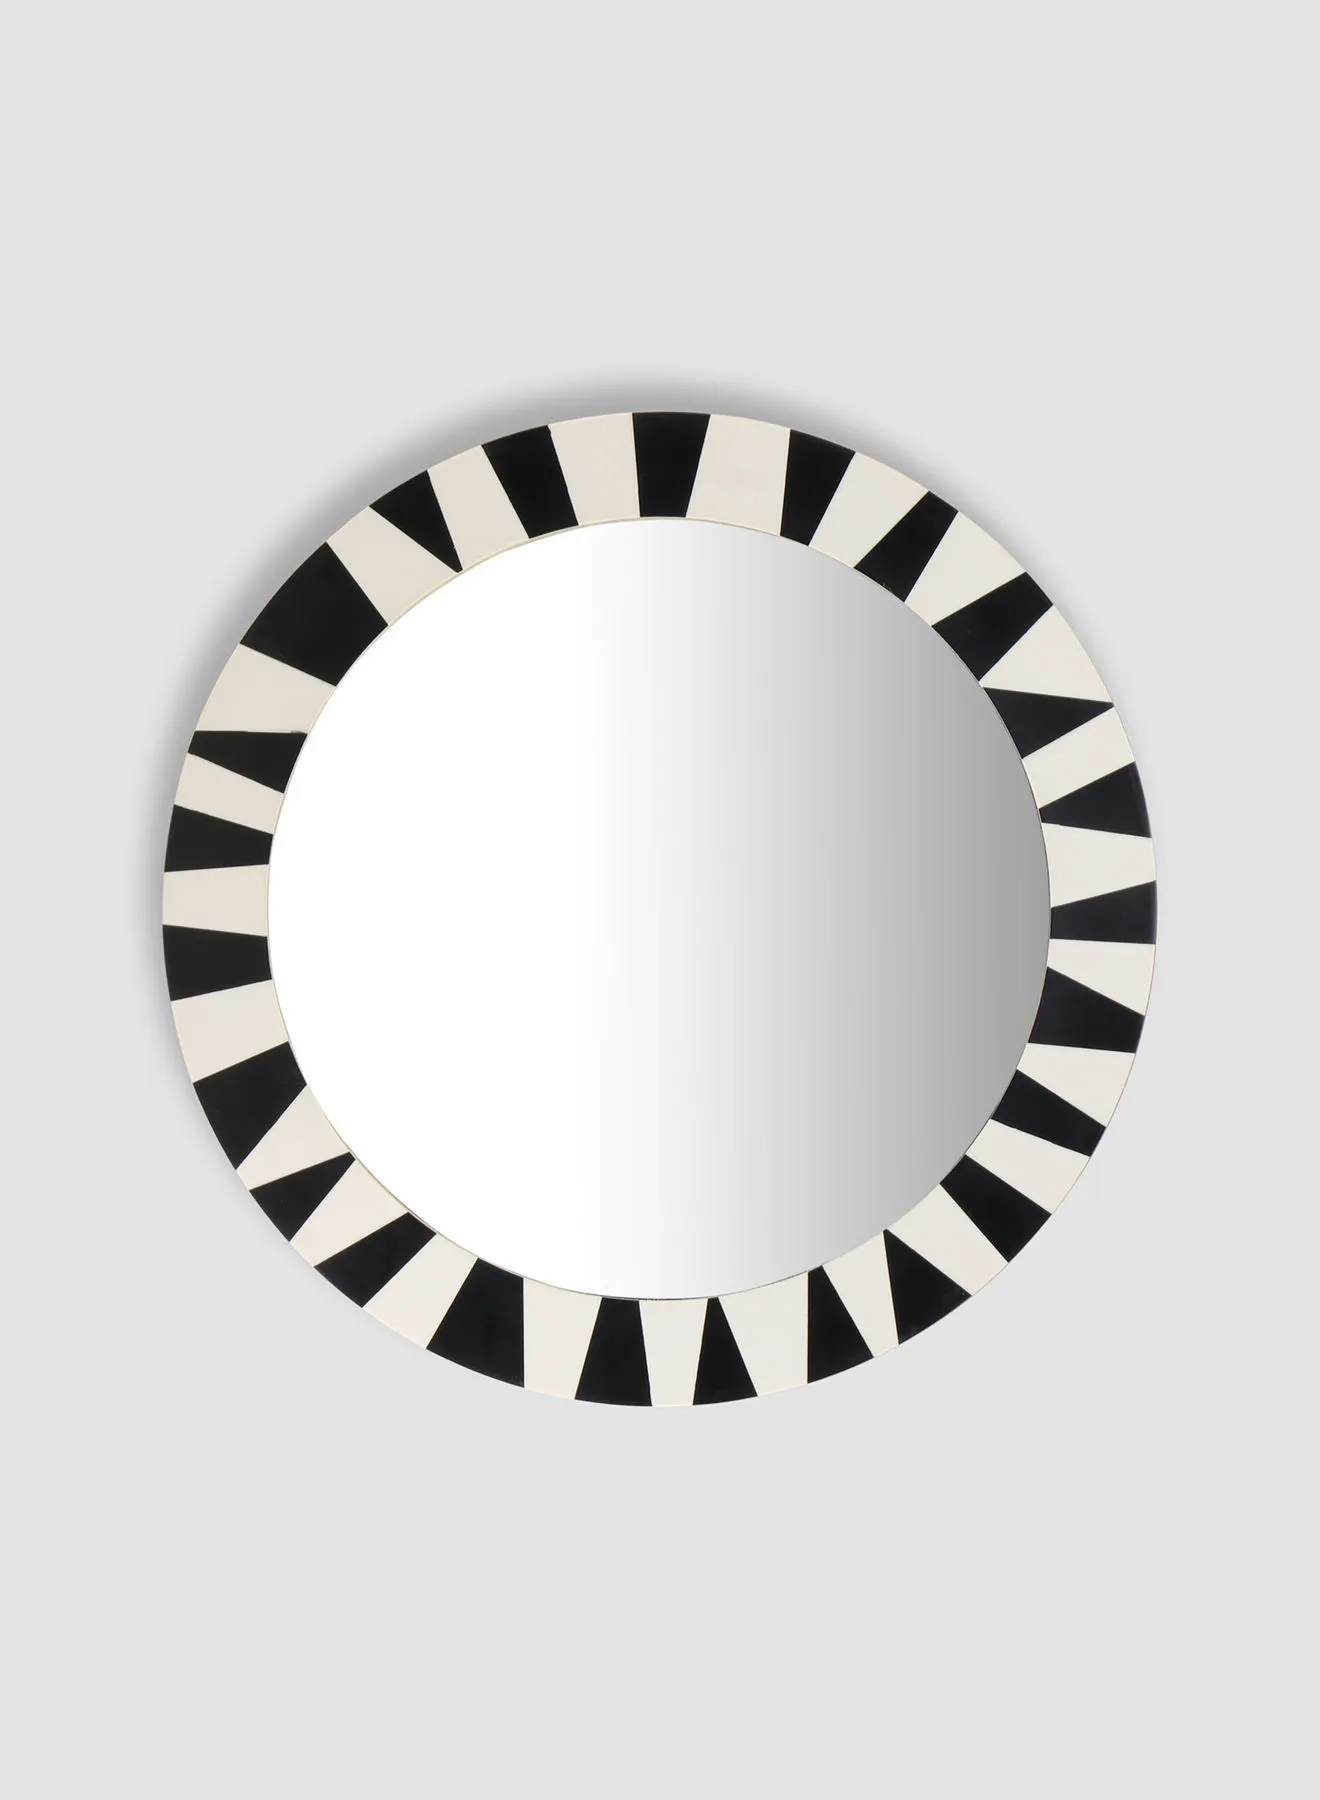 Switch Decorative Mirror Unique Luxury Quality Material For The Perfect Stylish Home  AHI-022321229 Ink Black/White Dia61centimeter